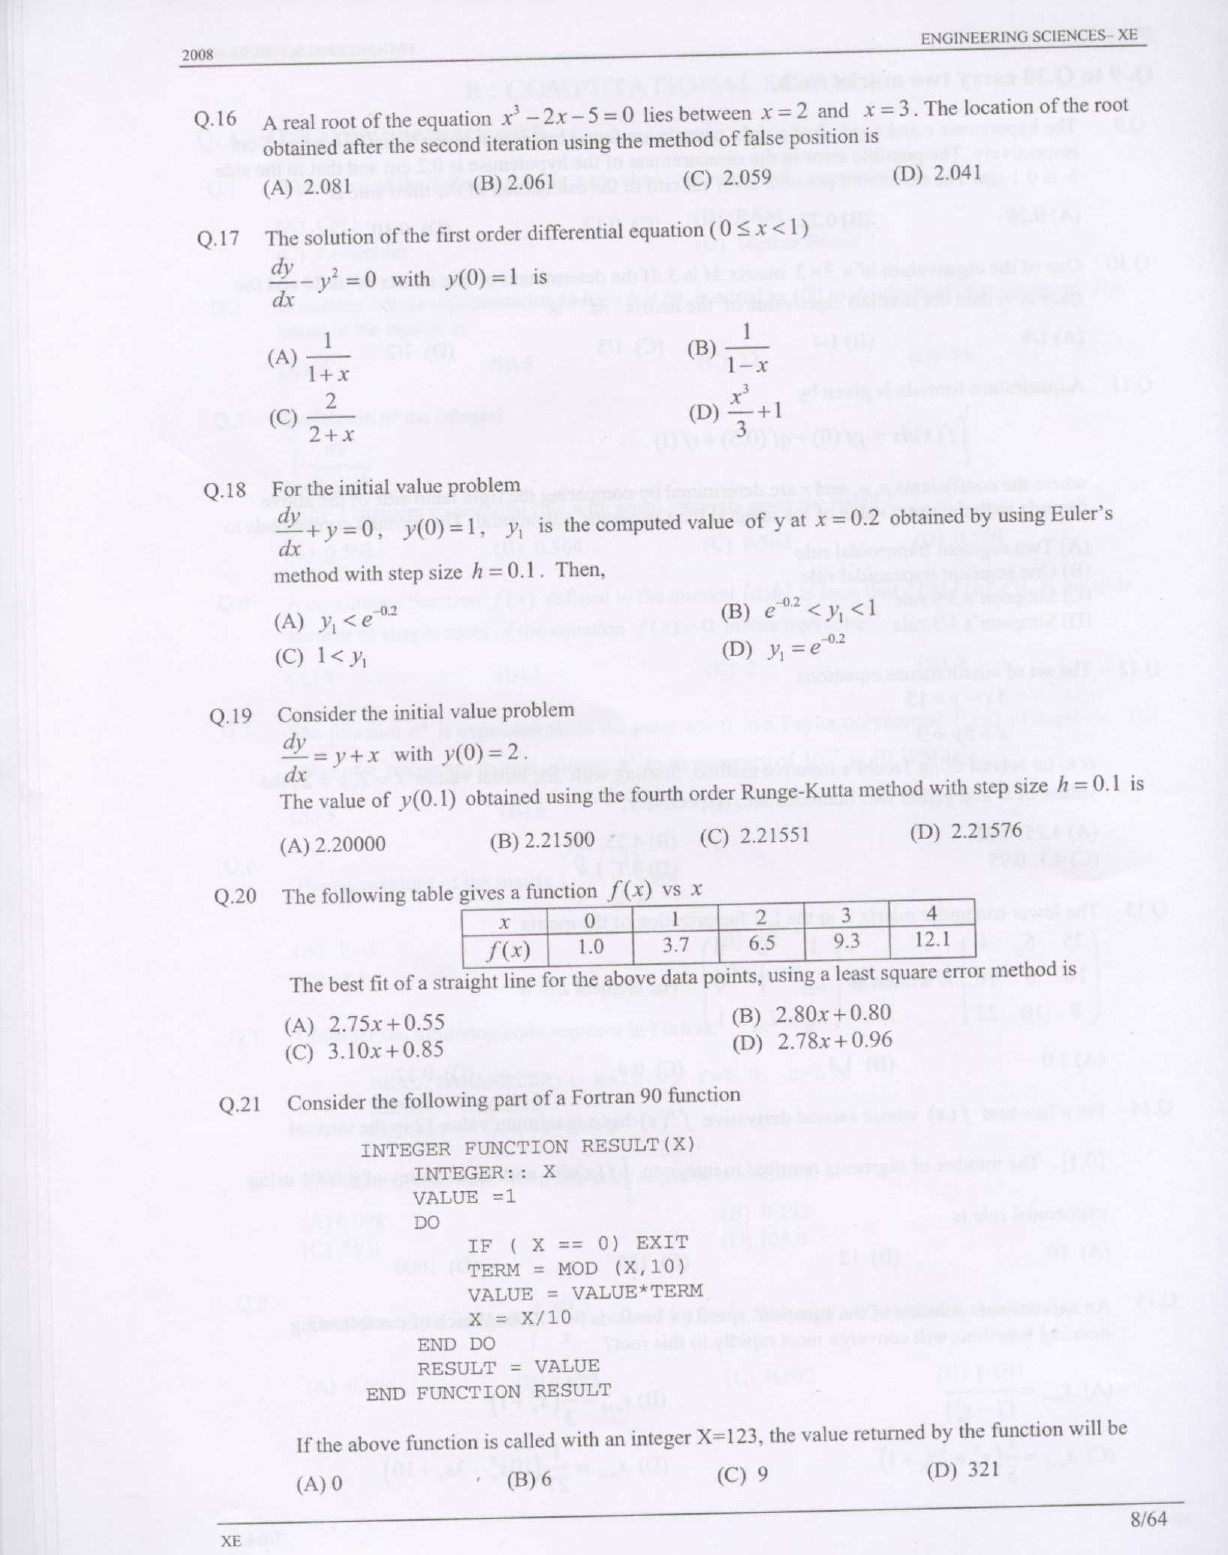 GATE Exam Question Paper 2008 Engineering Sciences 8